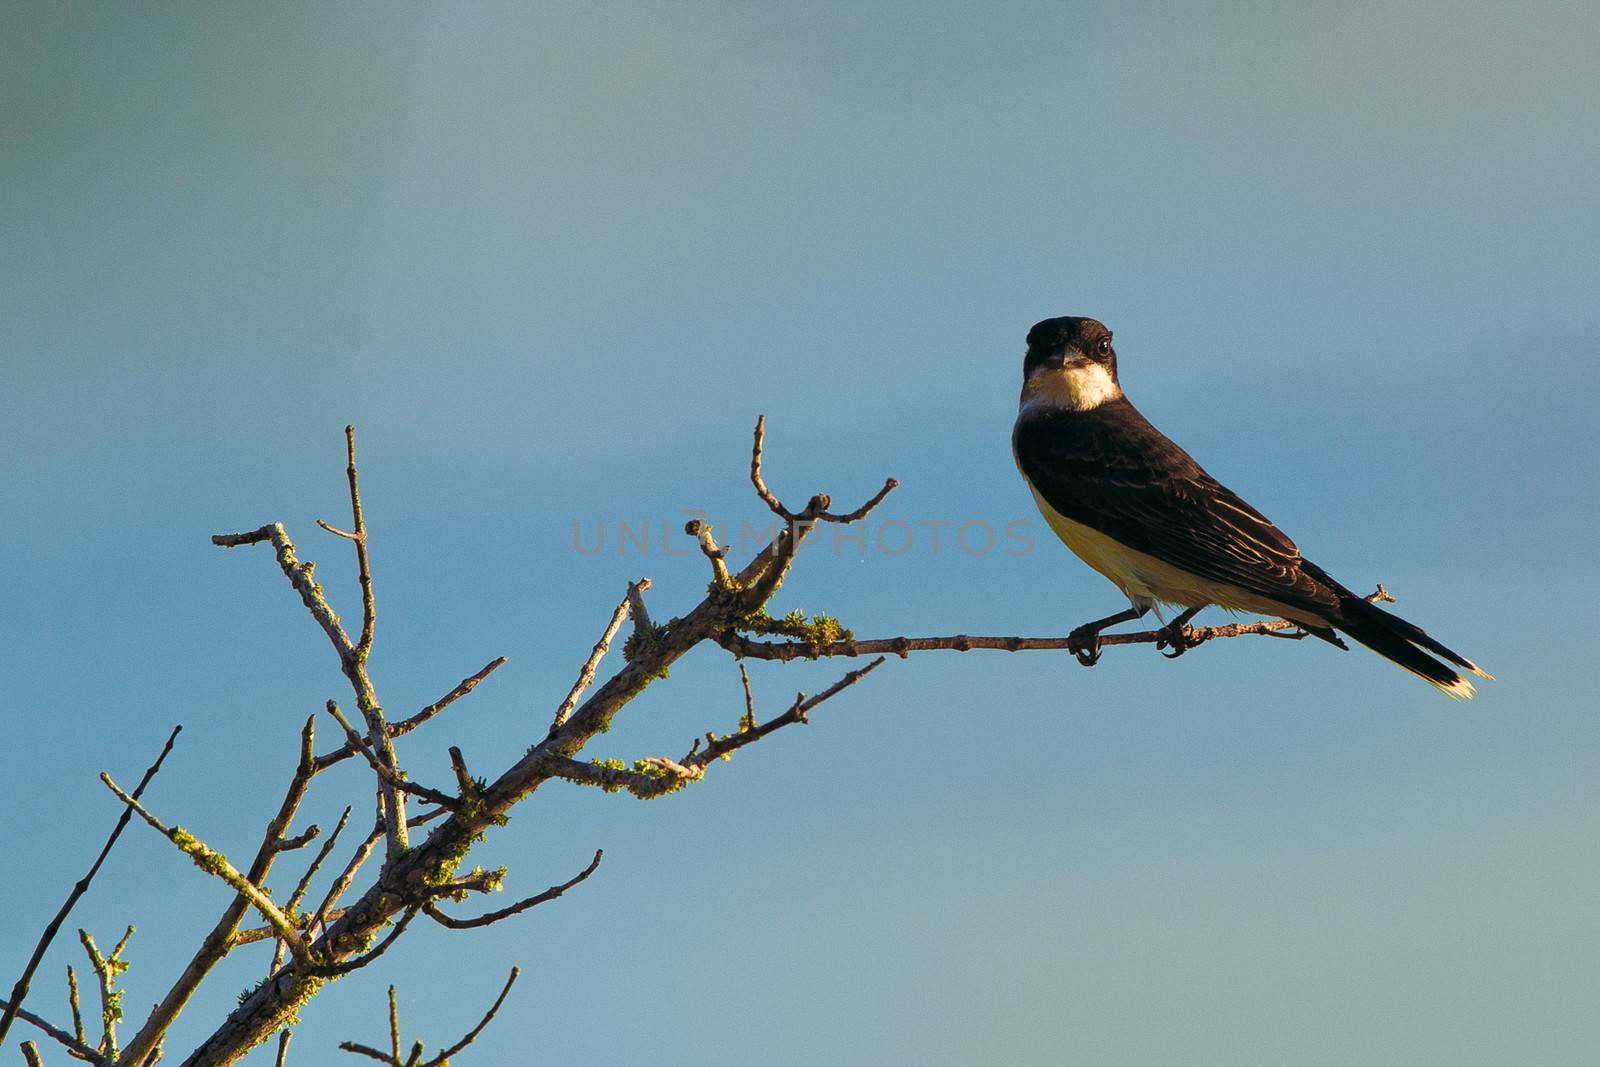 Bird perched on tree branch with blue sky background.